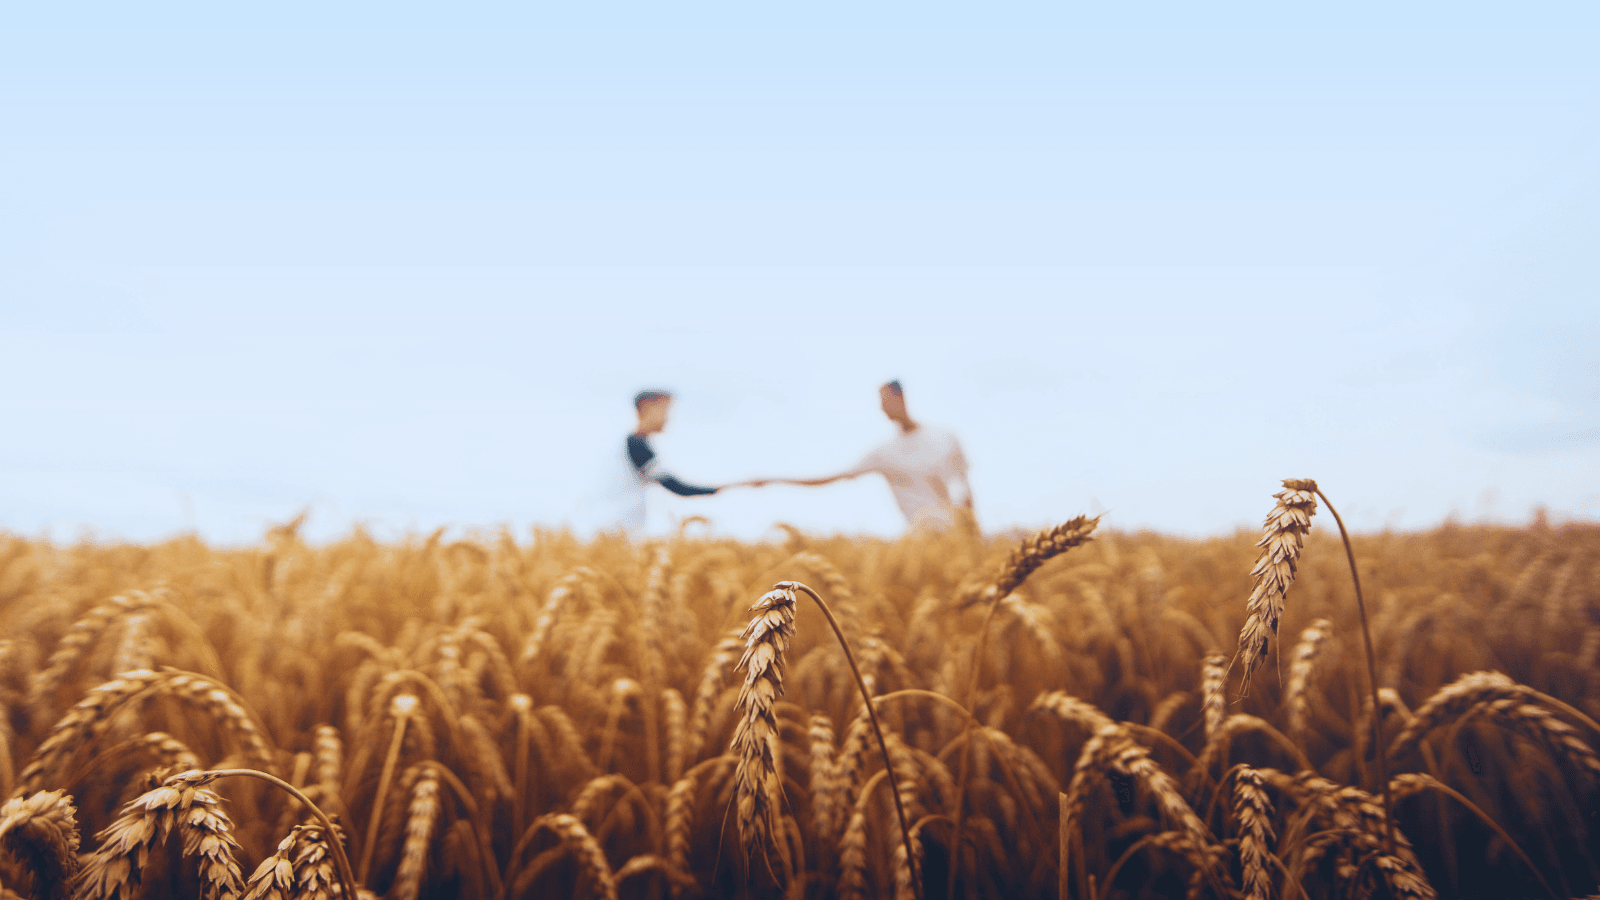 Wheat field with two people shaking hands in the distance